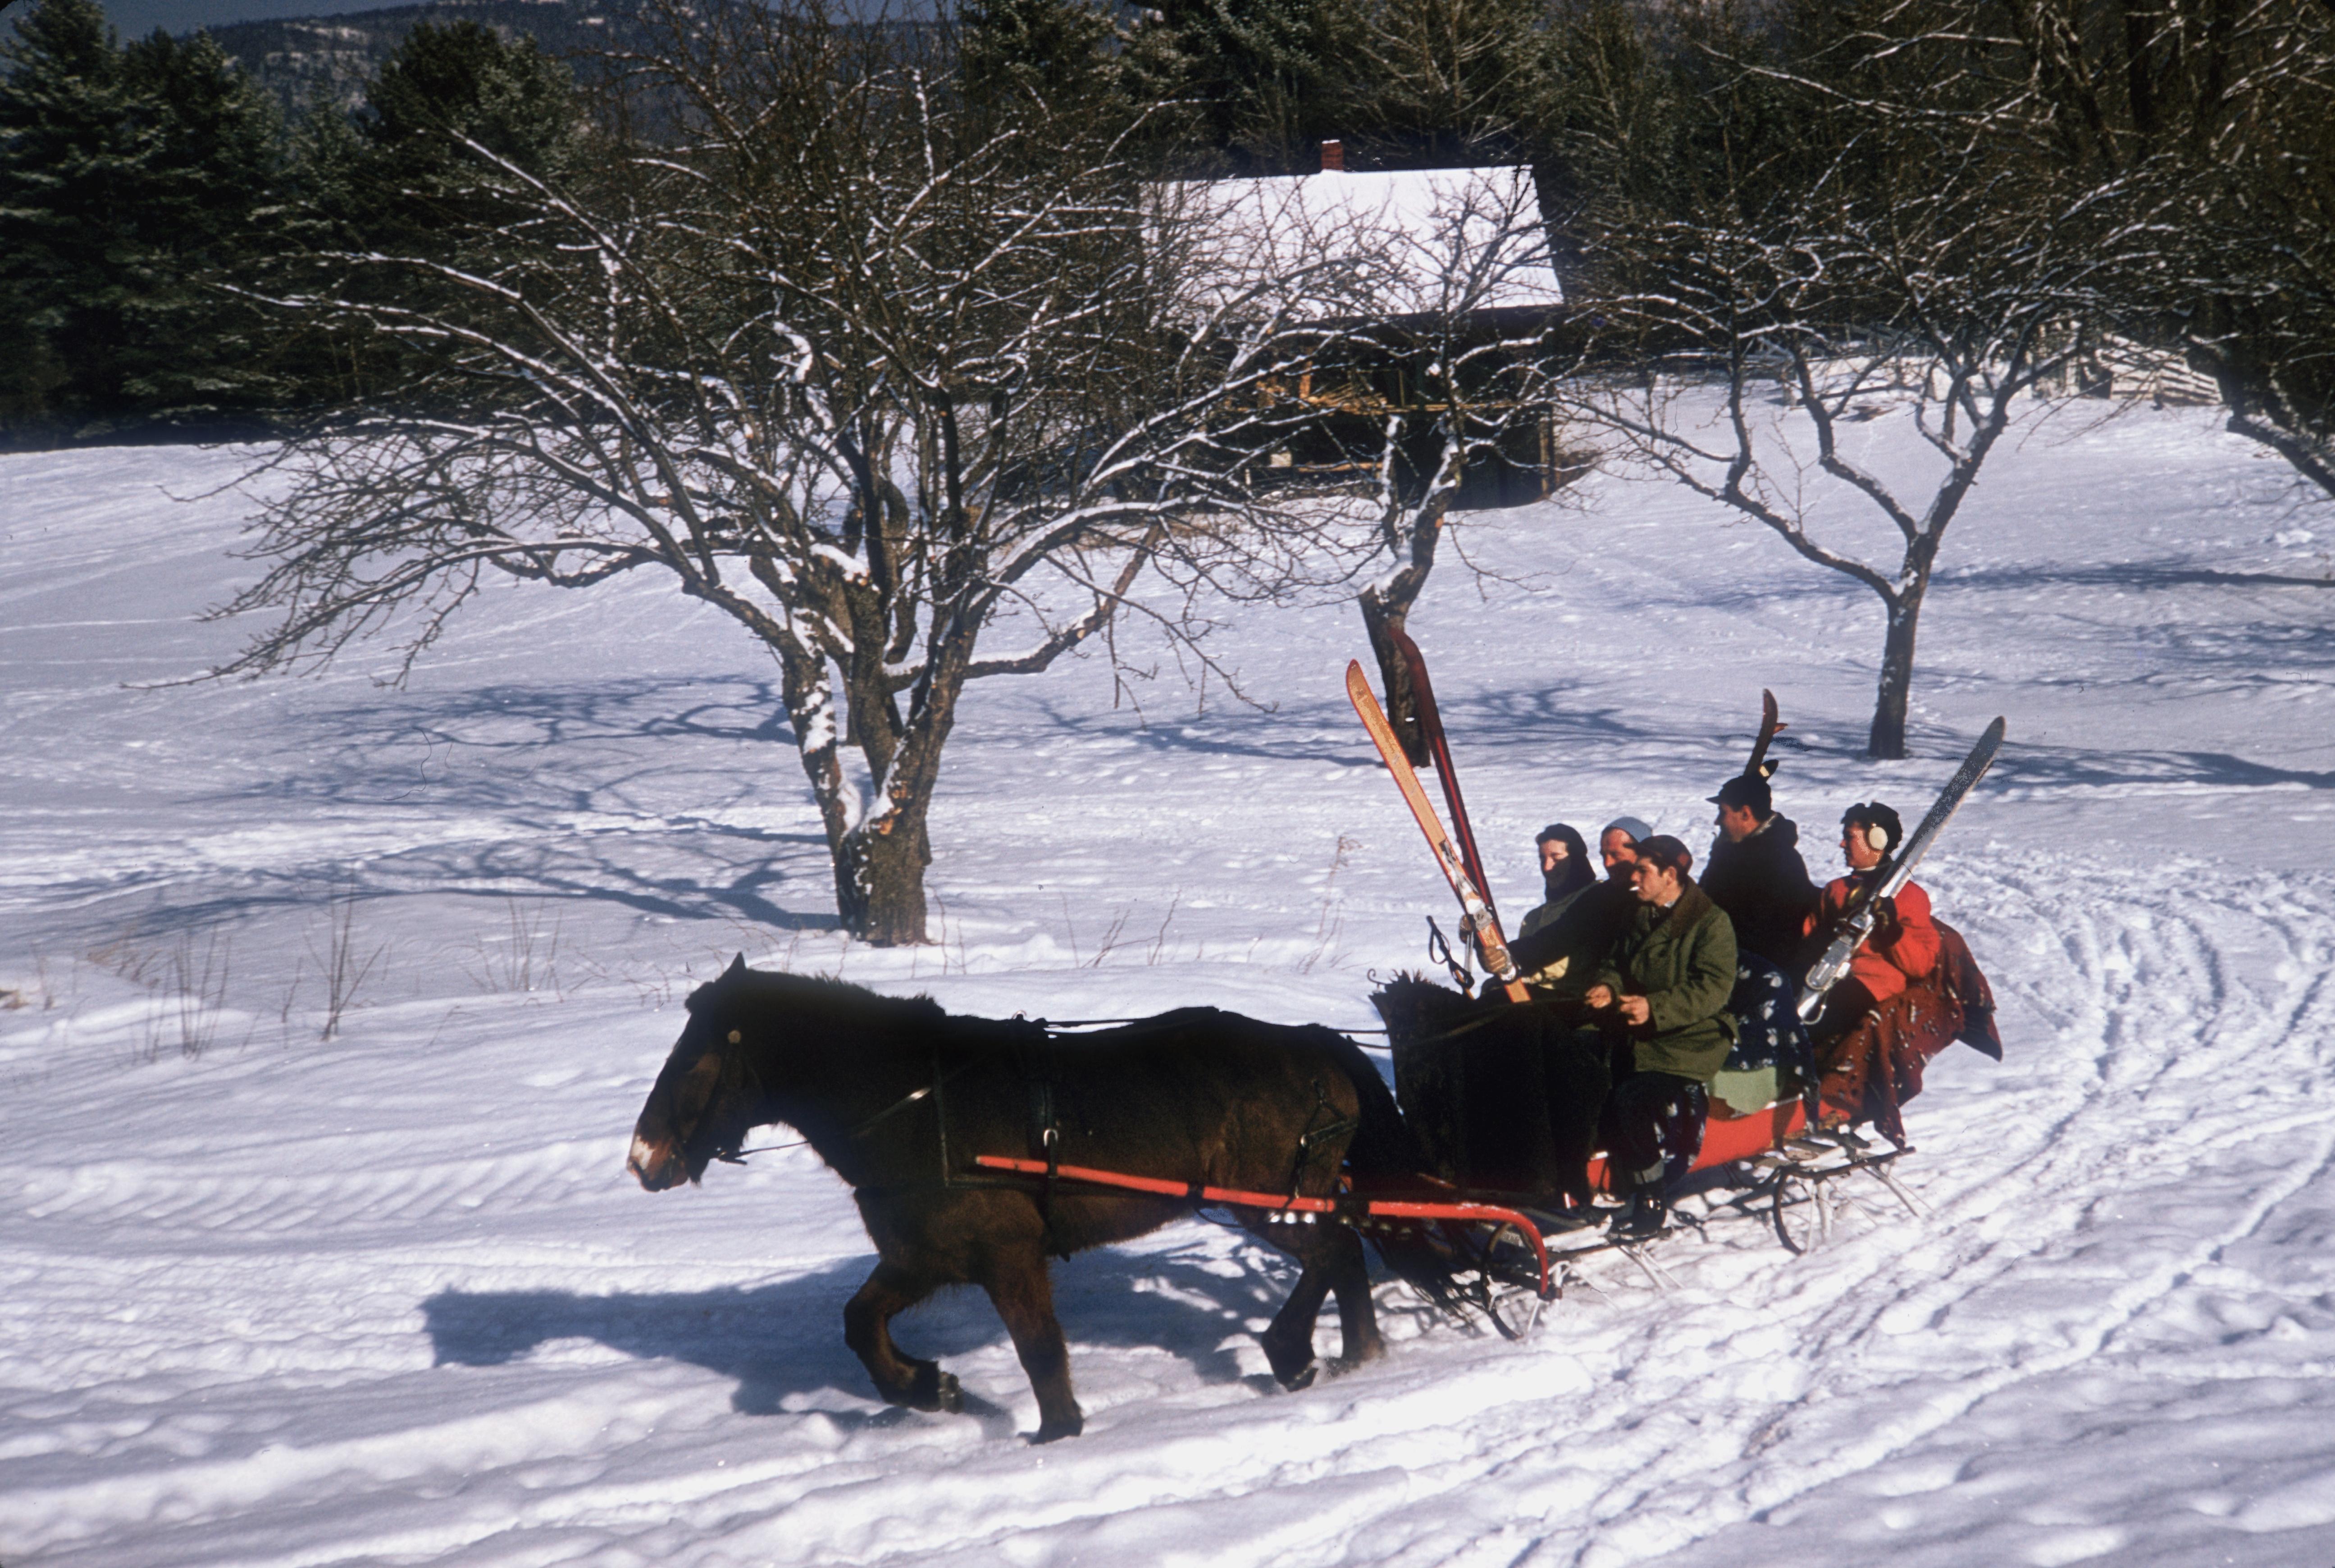 'North Conway Sleigh' 1955 Slim Aarons Limited Estate Edition Print 

1955, An open sleigh taking skiers to Cranmore Mountain, New Hampshire, USA. (Photo by Slim Aarons/Getty Images)

Produced from the original transparency
Certificate of